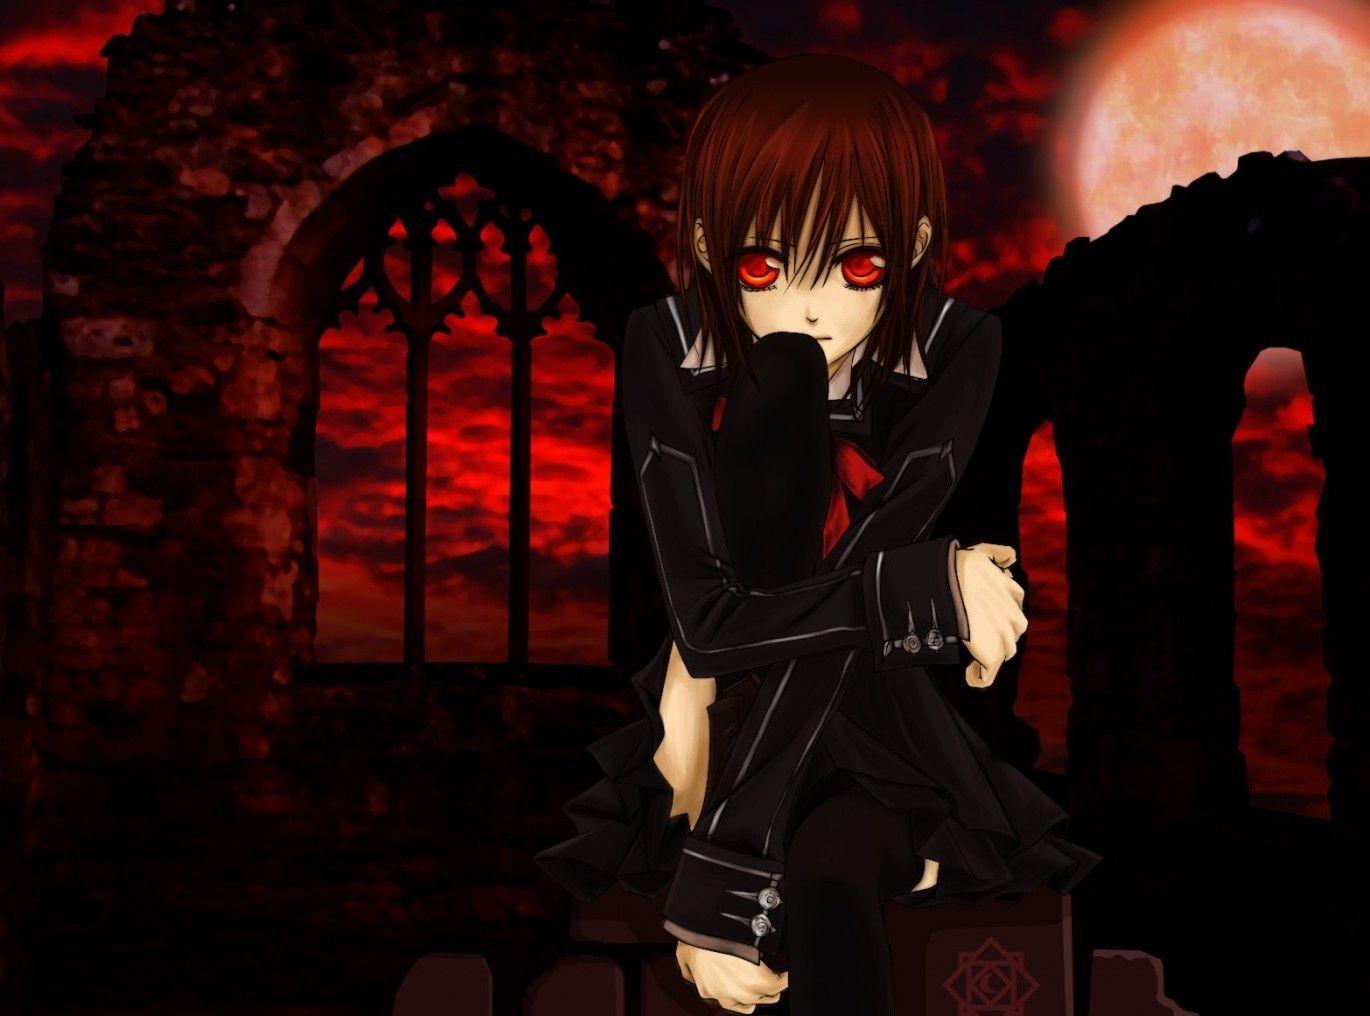 Cute Anime Vampire Wallpapers - Top Free Cute Anime Vampire Backgrounds ...